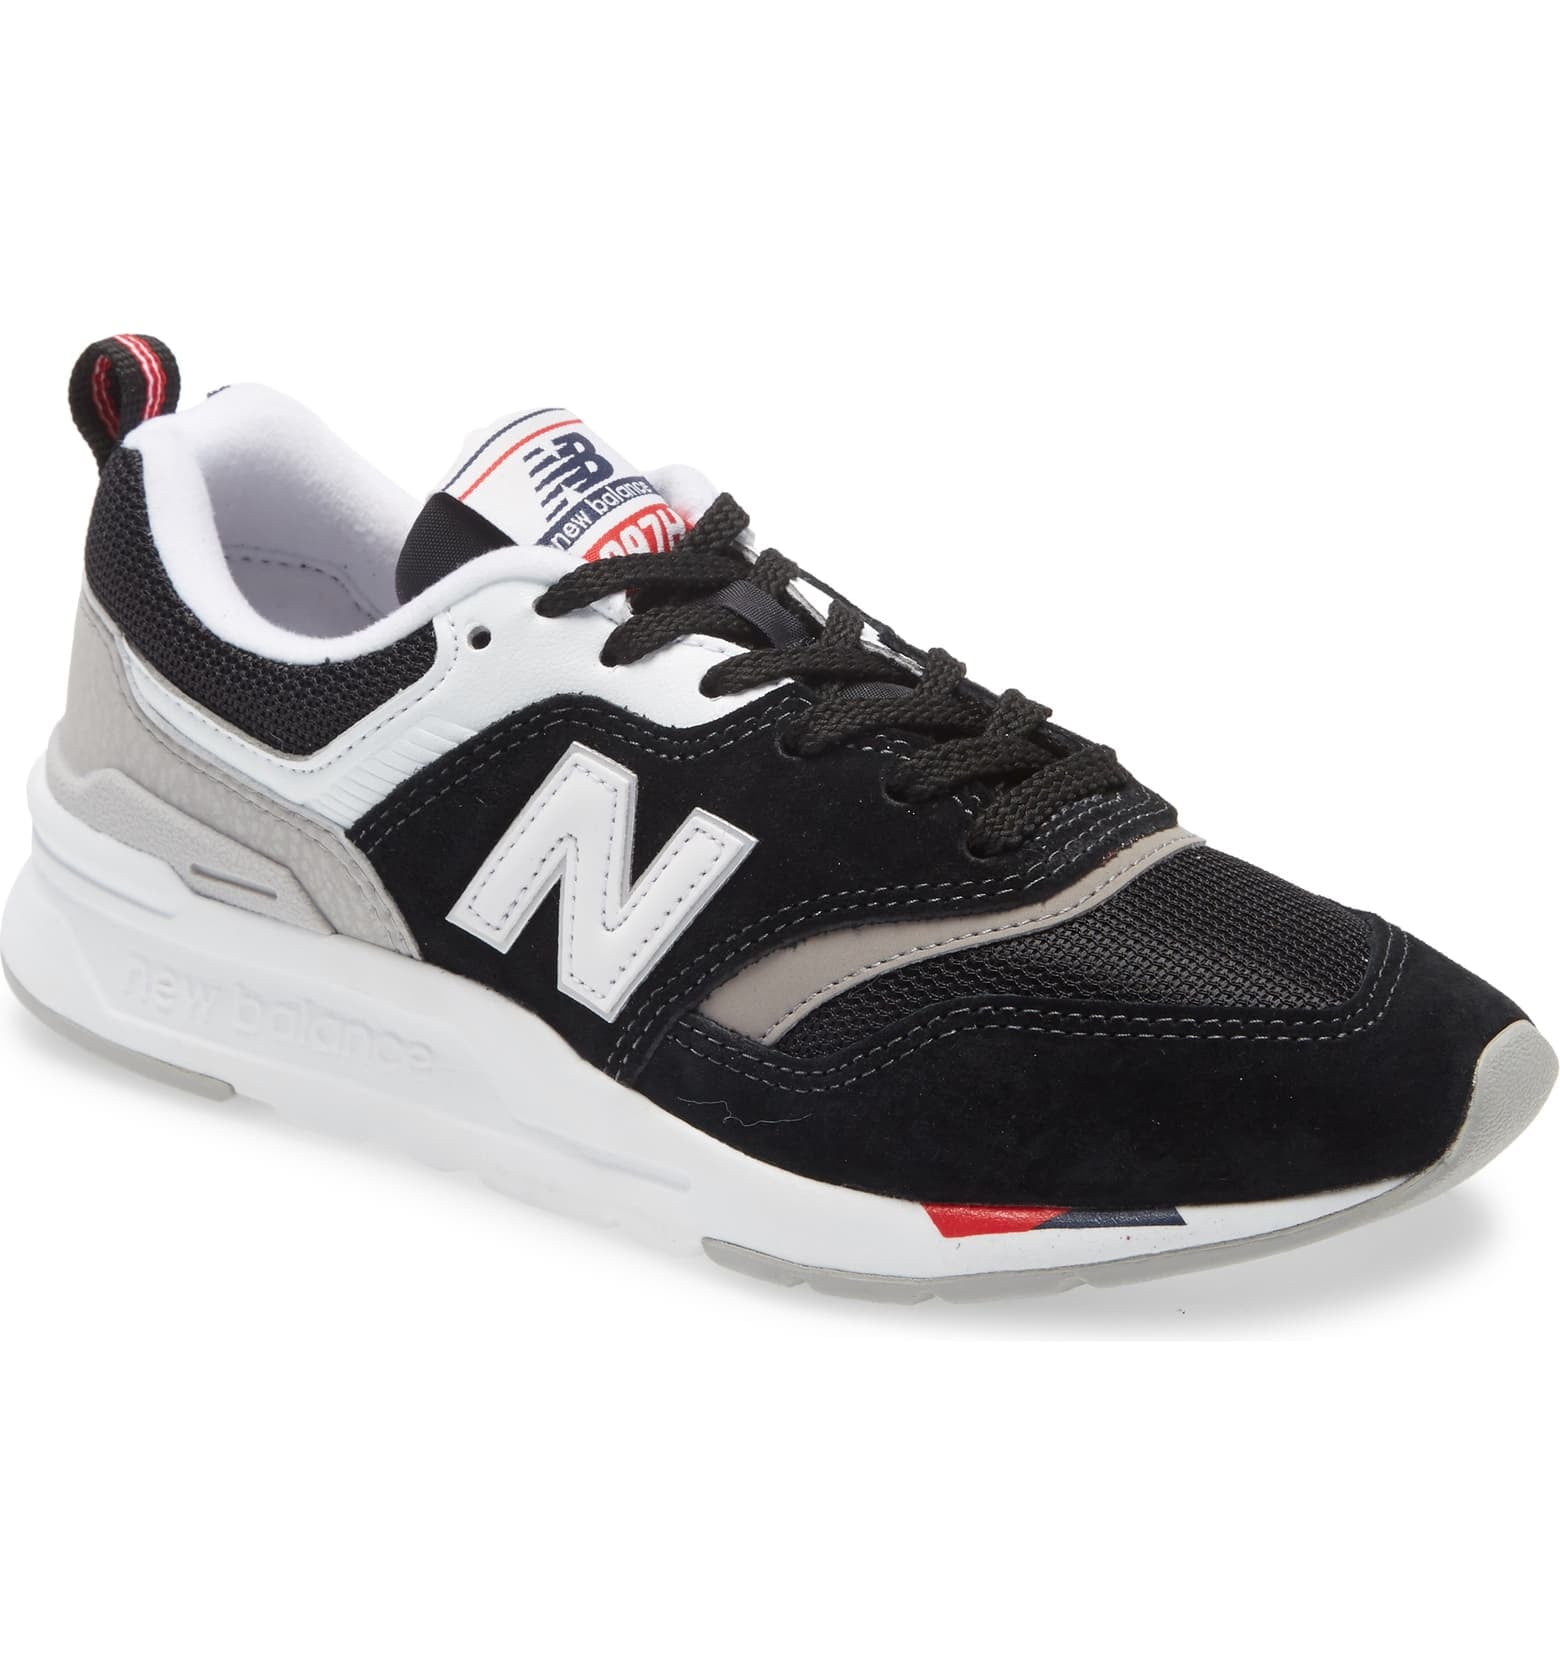 new balance sneakers at kohl's